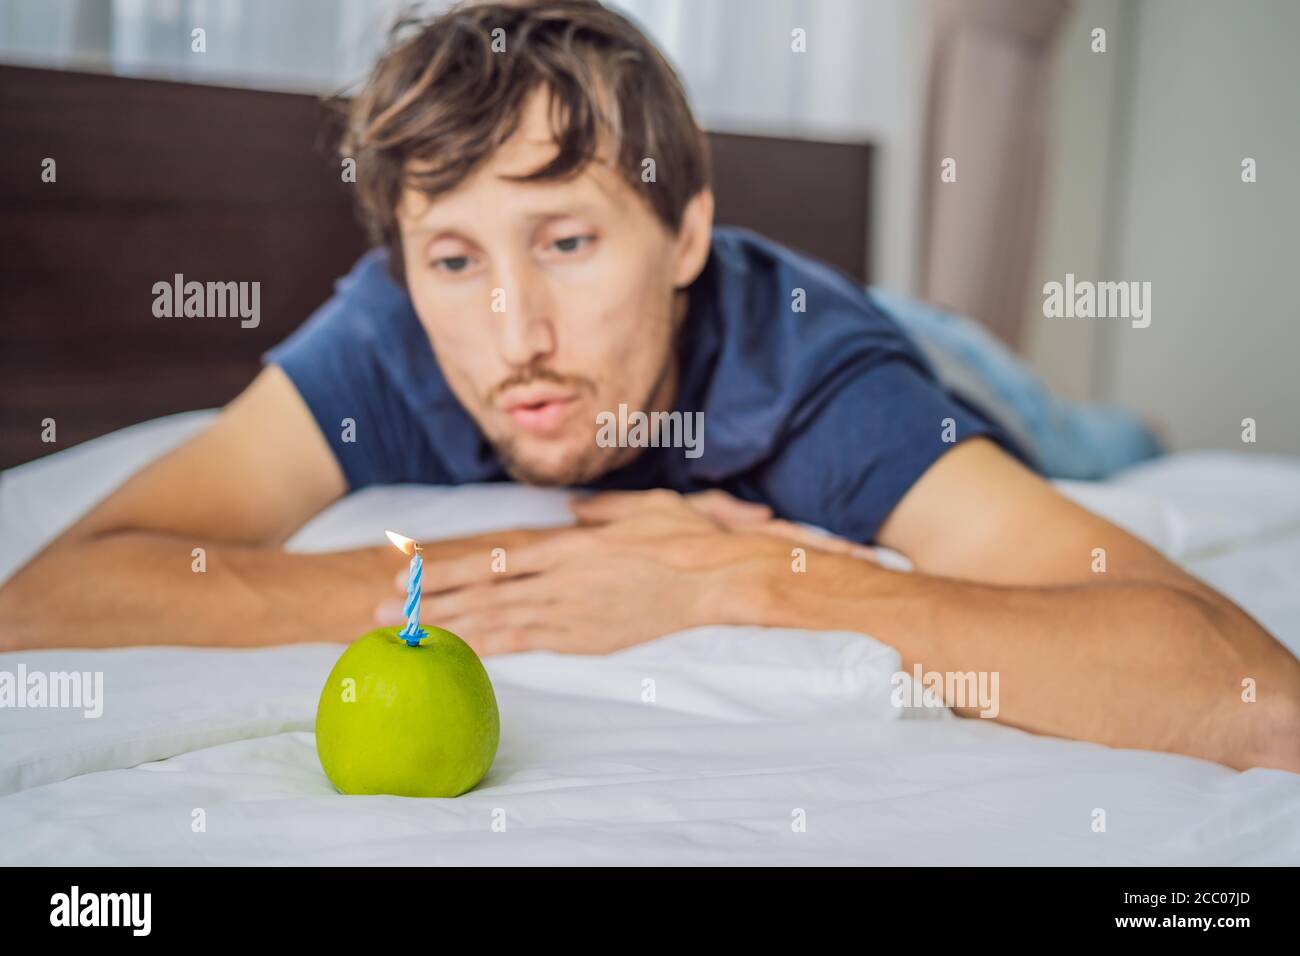 Quarantine birthday. Man with a smartphone and birthday cake-apple with candle. Stay home while quarantine. Online call. Video conference Stock Photo